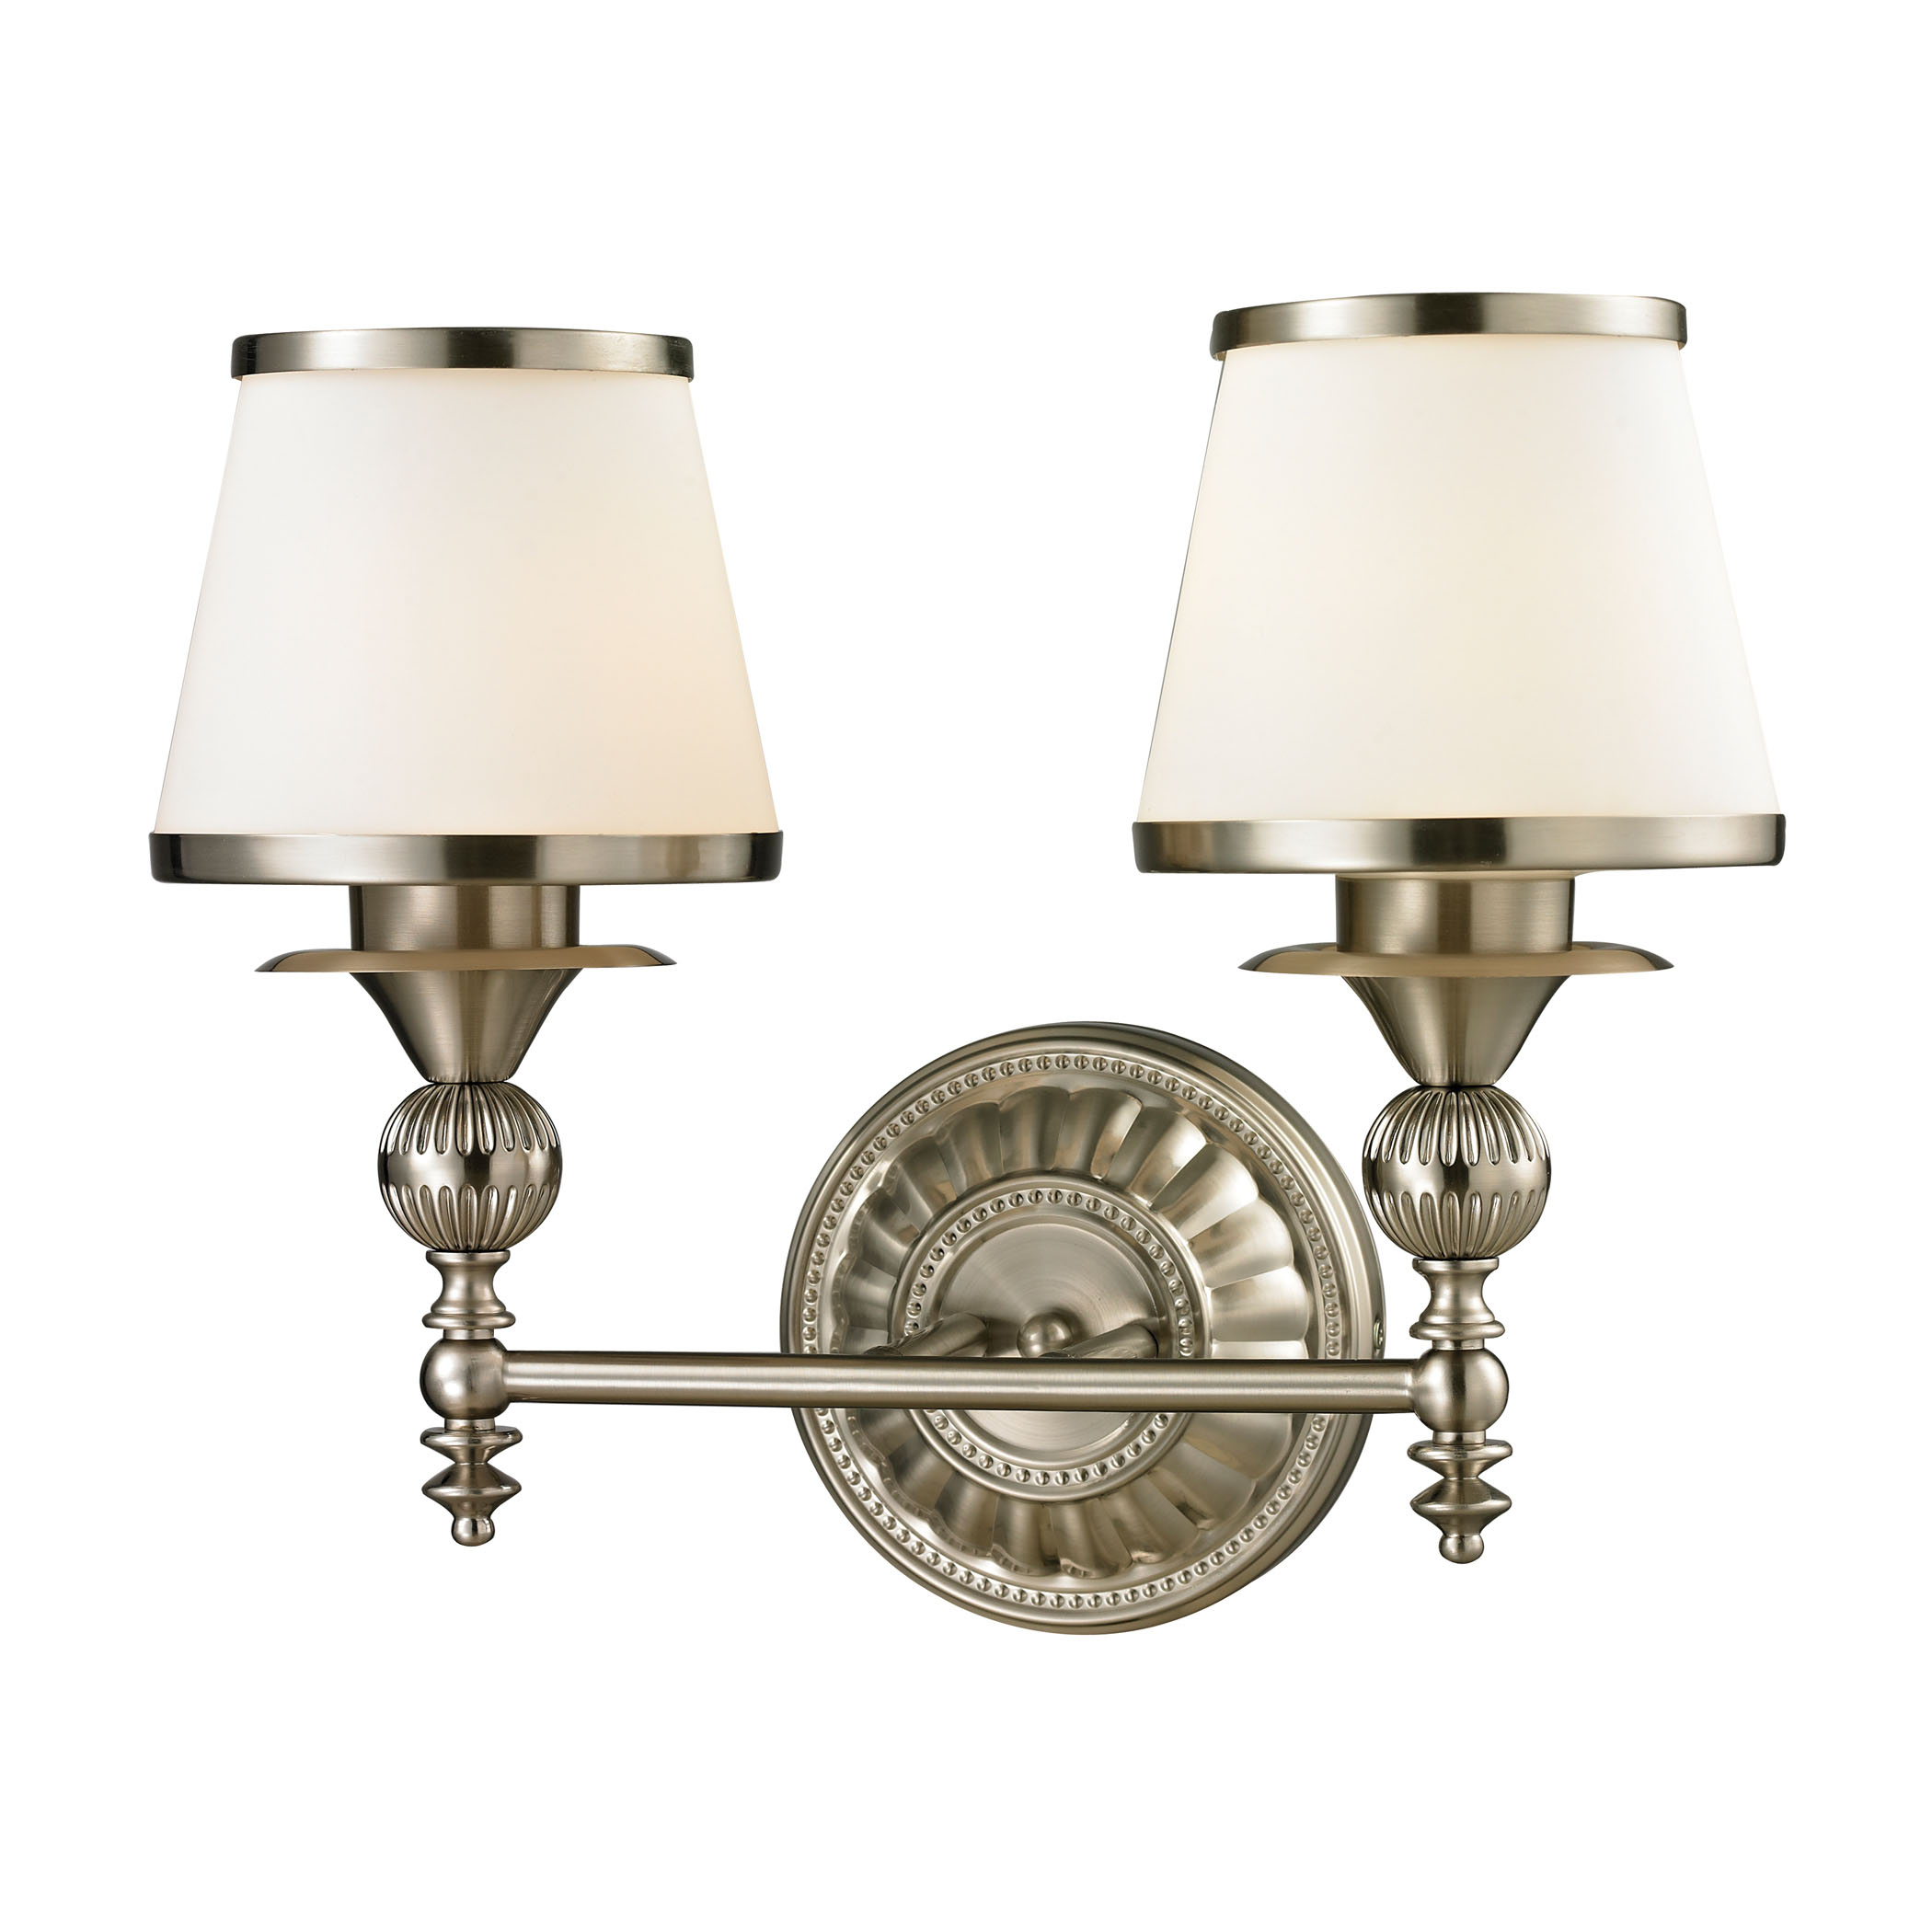 Smithfield Collection 2 light bath in Brushed Nickel